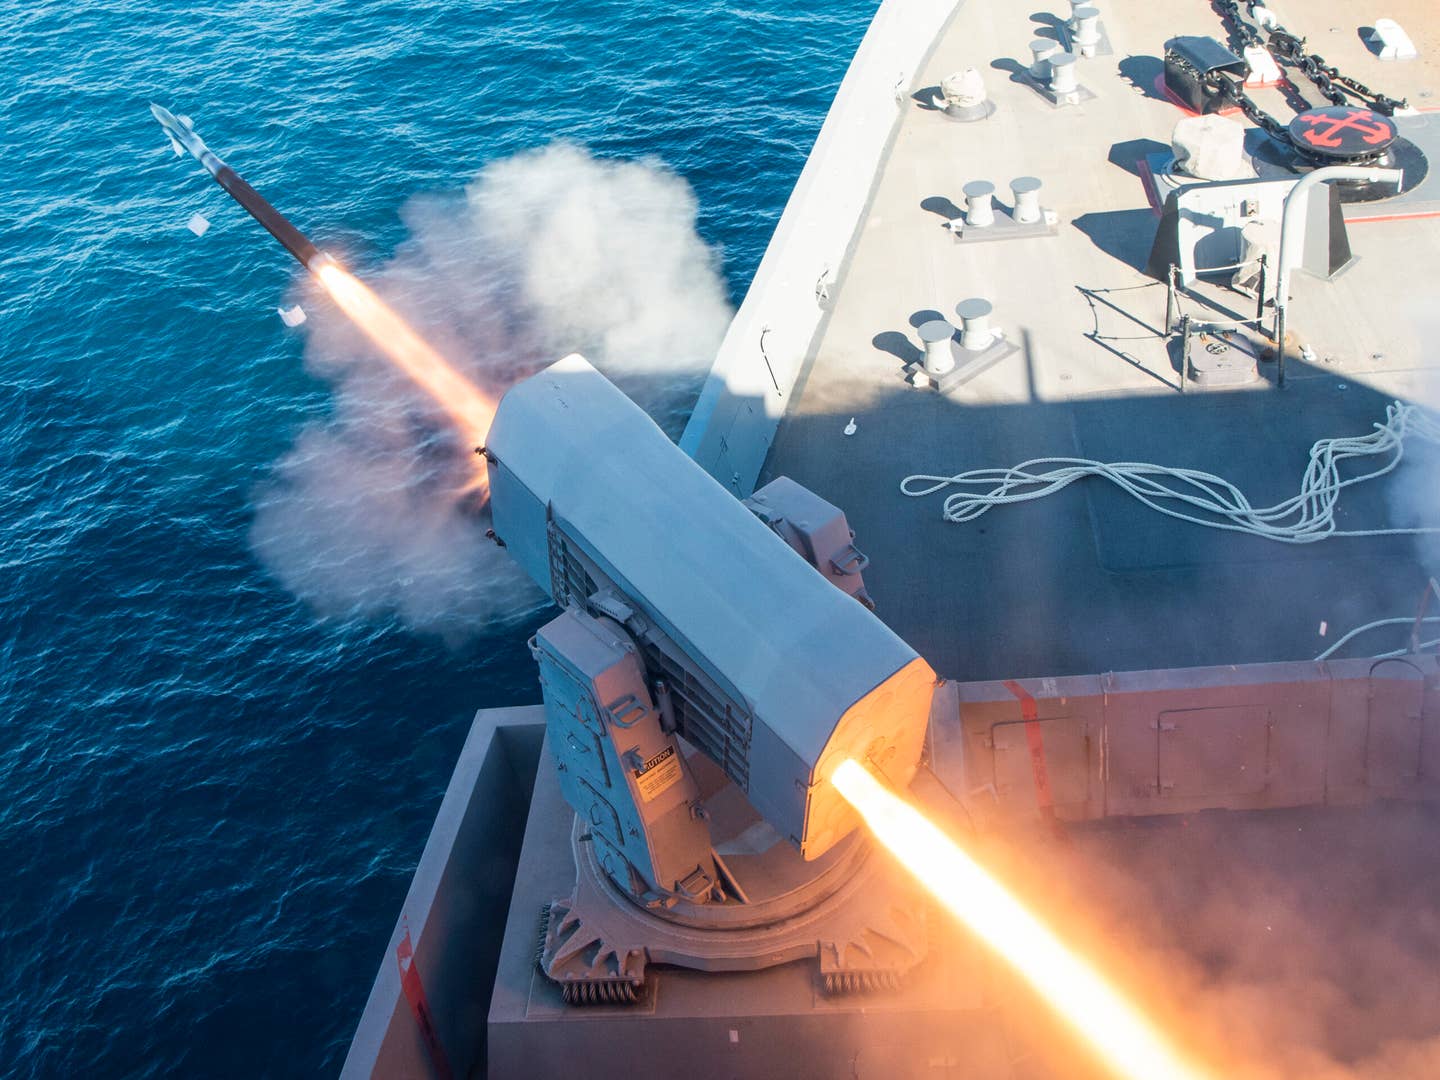 The amphibious transport dock ship USS <em>Anchorage</em> (LPD-23) fires a RIM-116 Rolling Airframe Missile (RAM) during a live-fire exercise in the Pacific Ocean earlier this year. <em>U.S. Navy Photo by Mass Communication Specialist 2nd Class Hector Carrera</em>